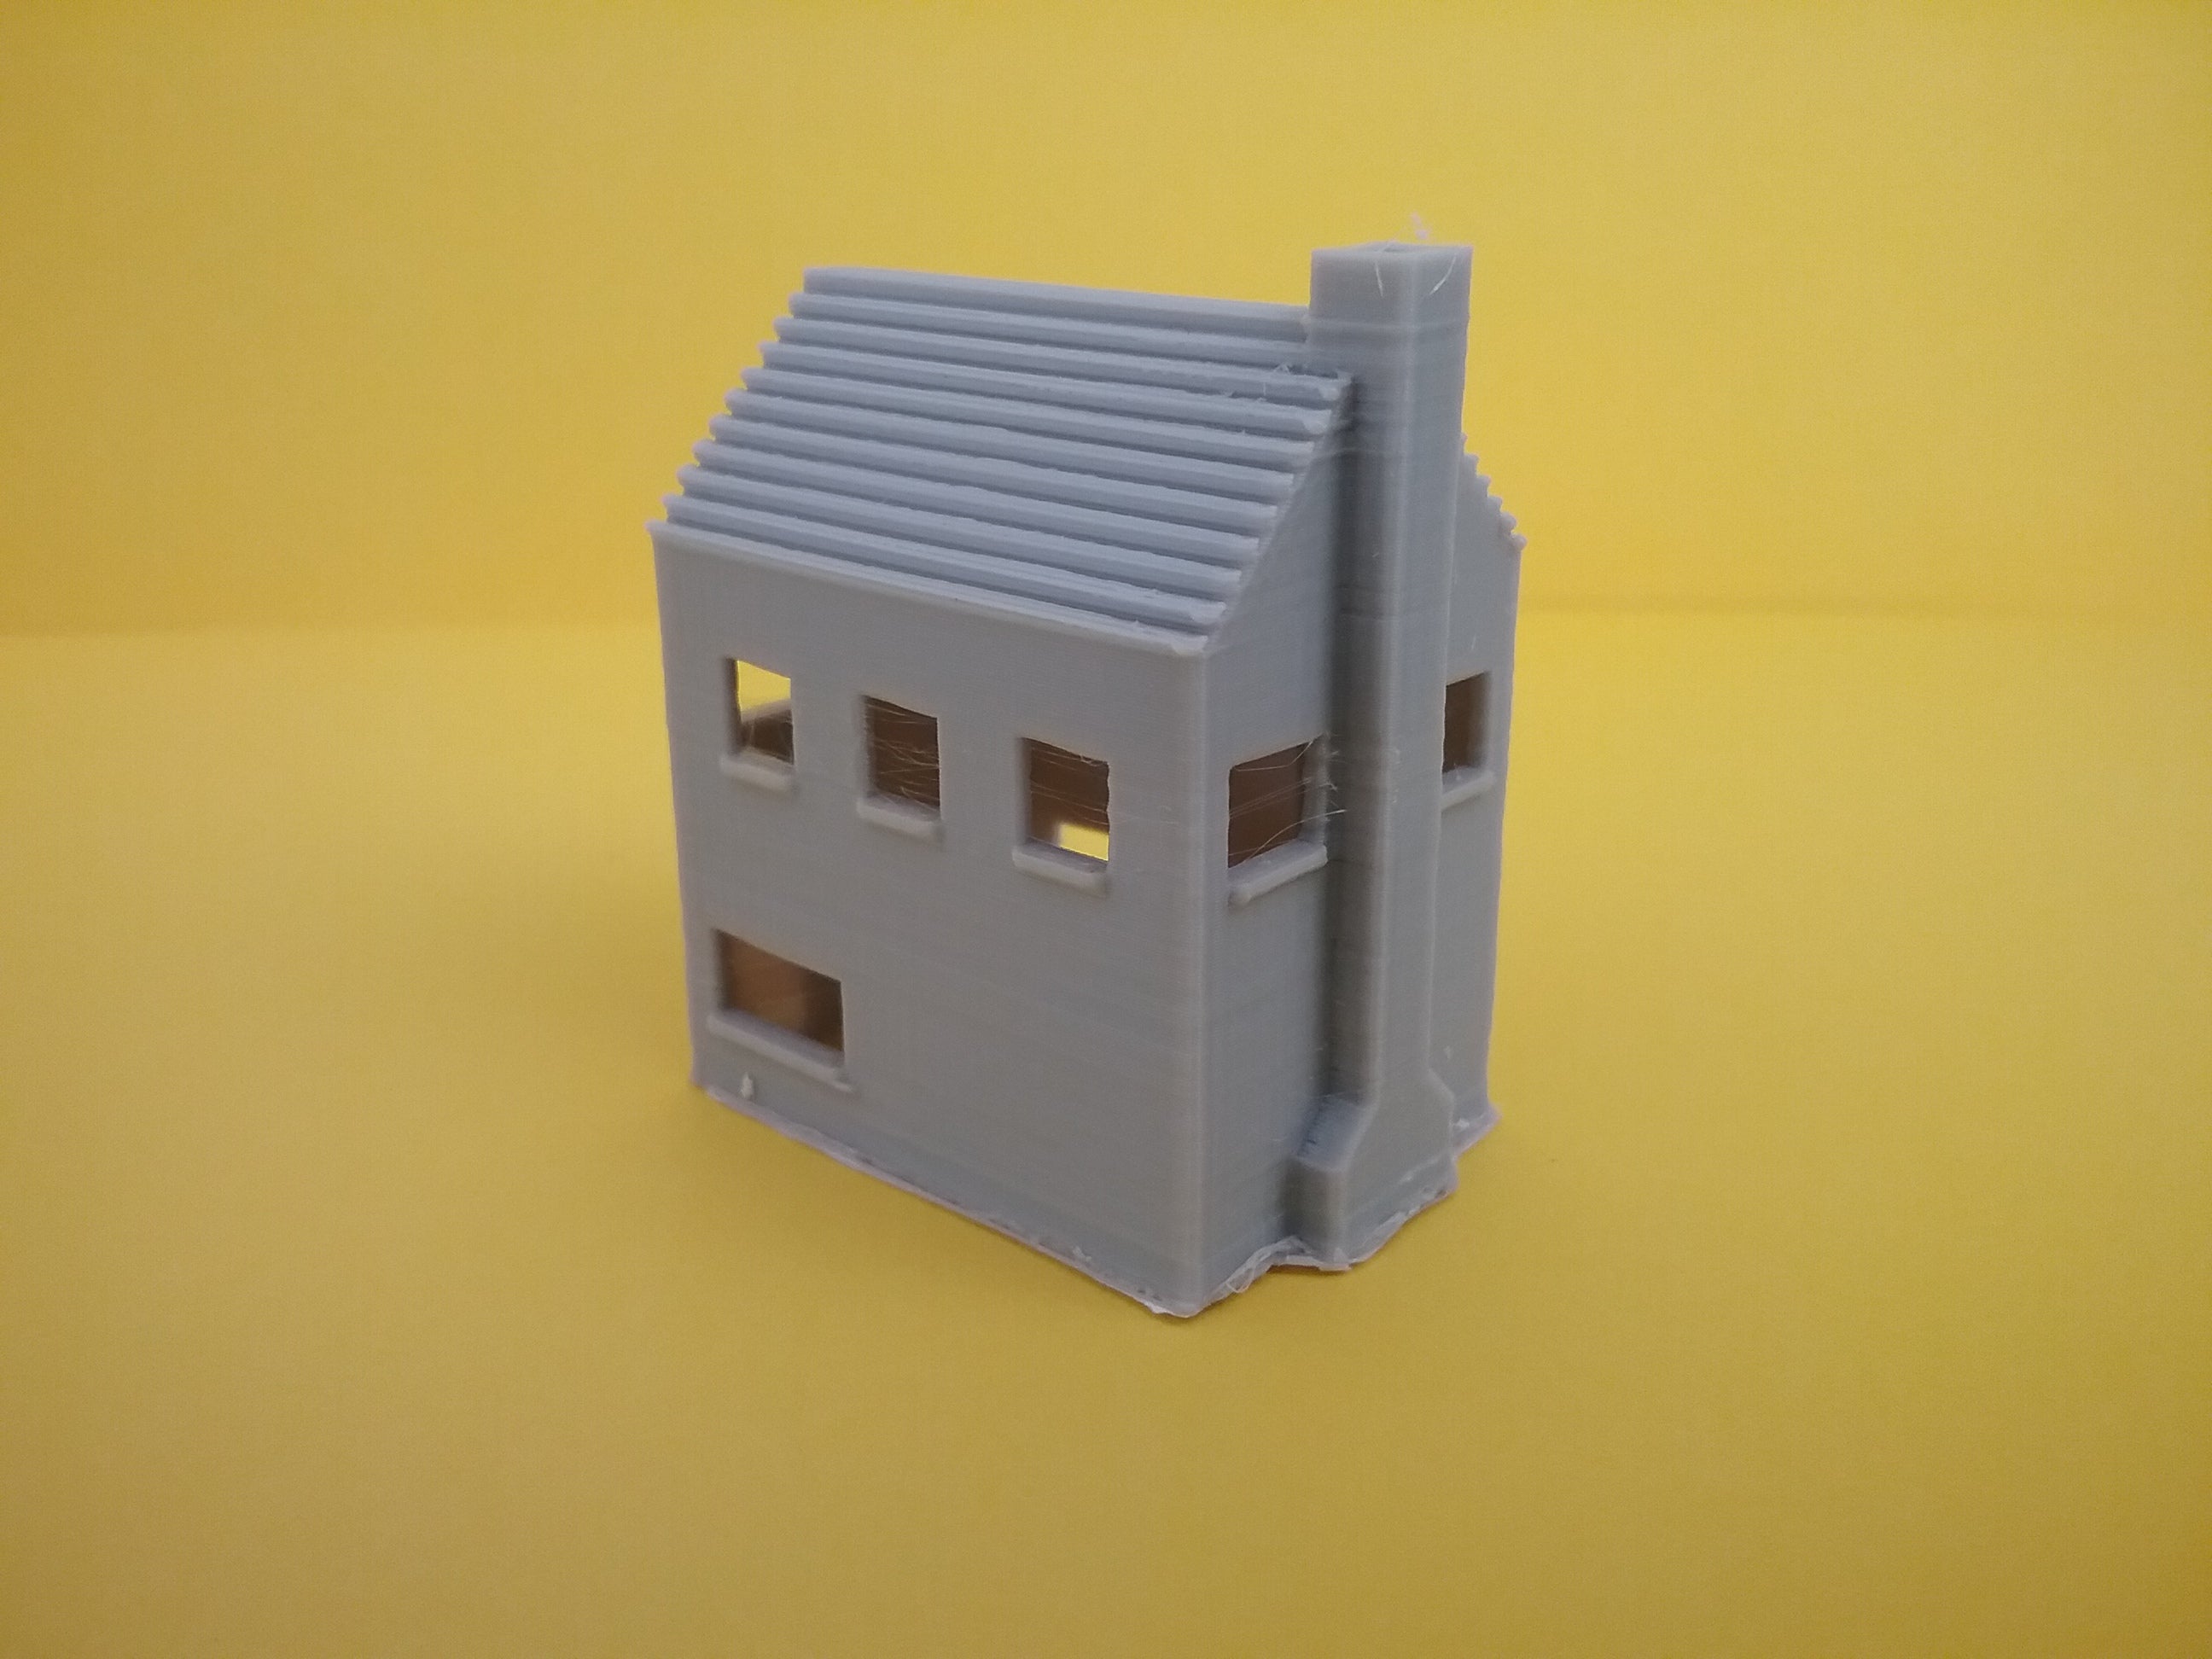 Z Scale ZH03R 2-STORY House 3-D Printed